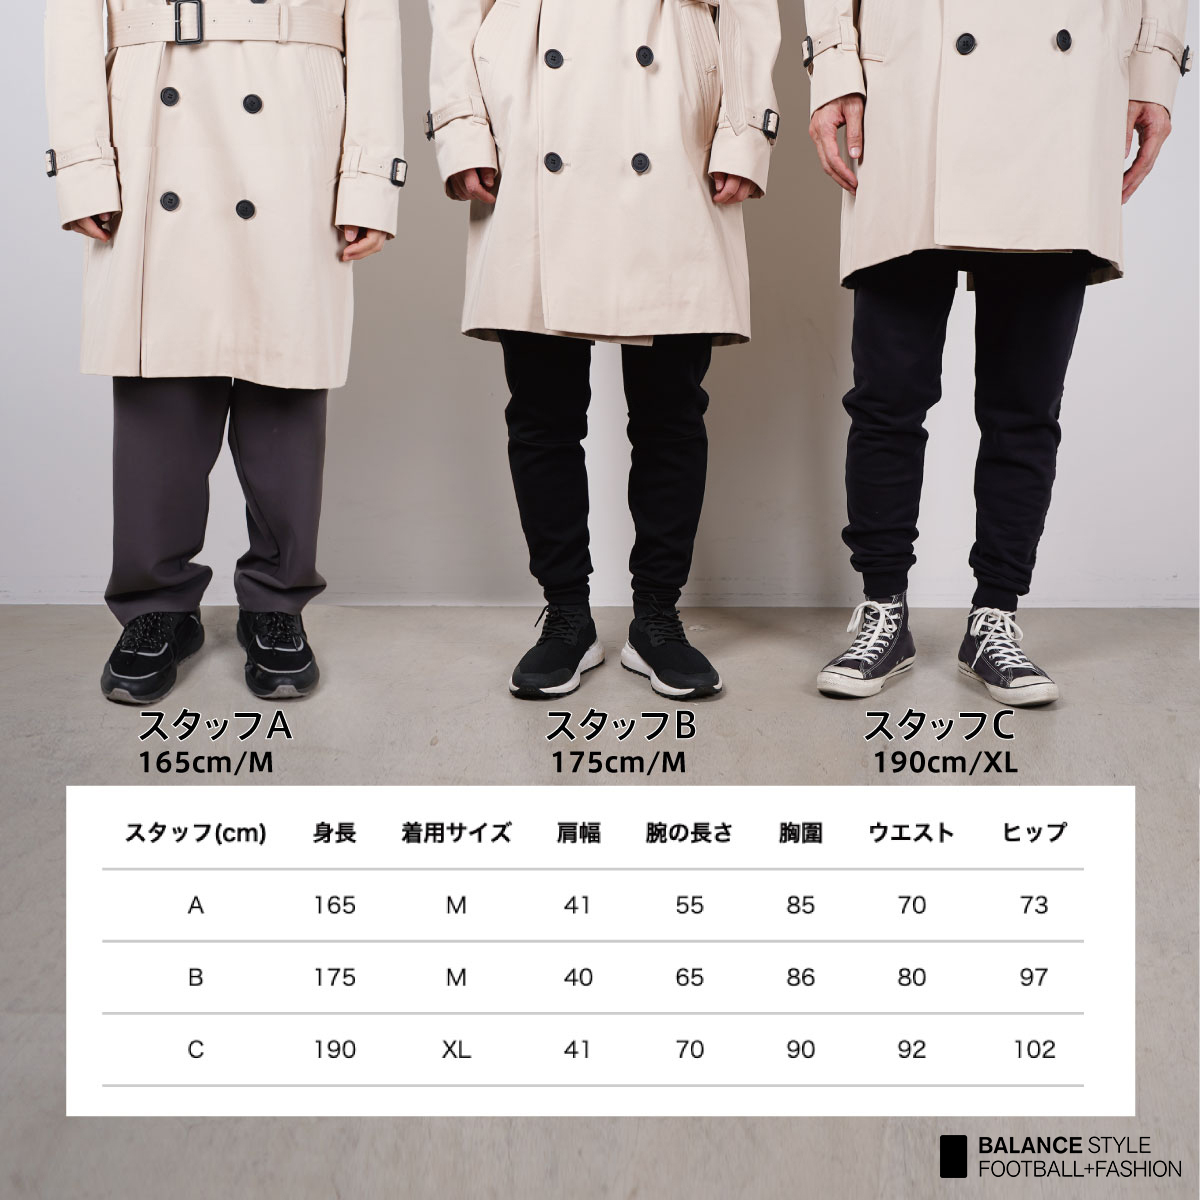 TRENCH LONDONの“THE KING CLASSIC TRENCH”身長別サイズ選び